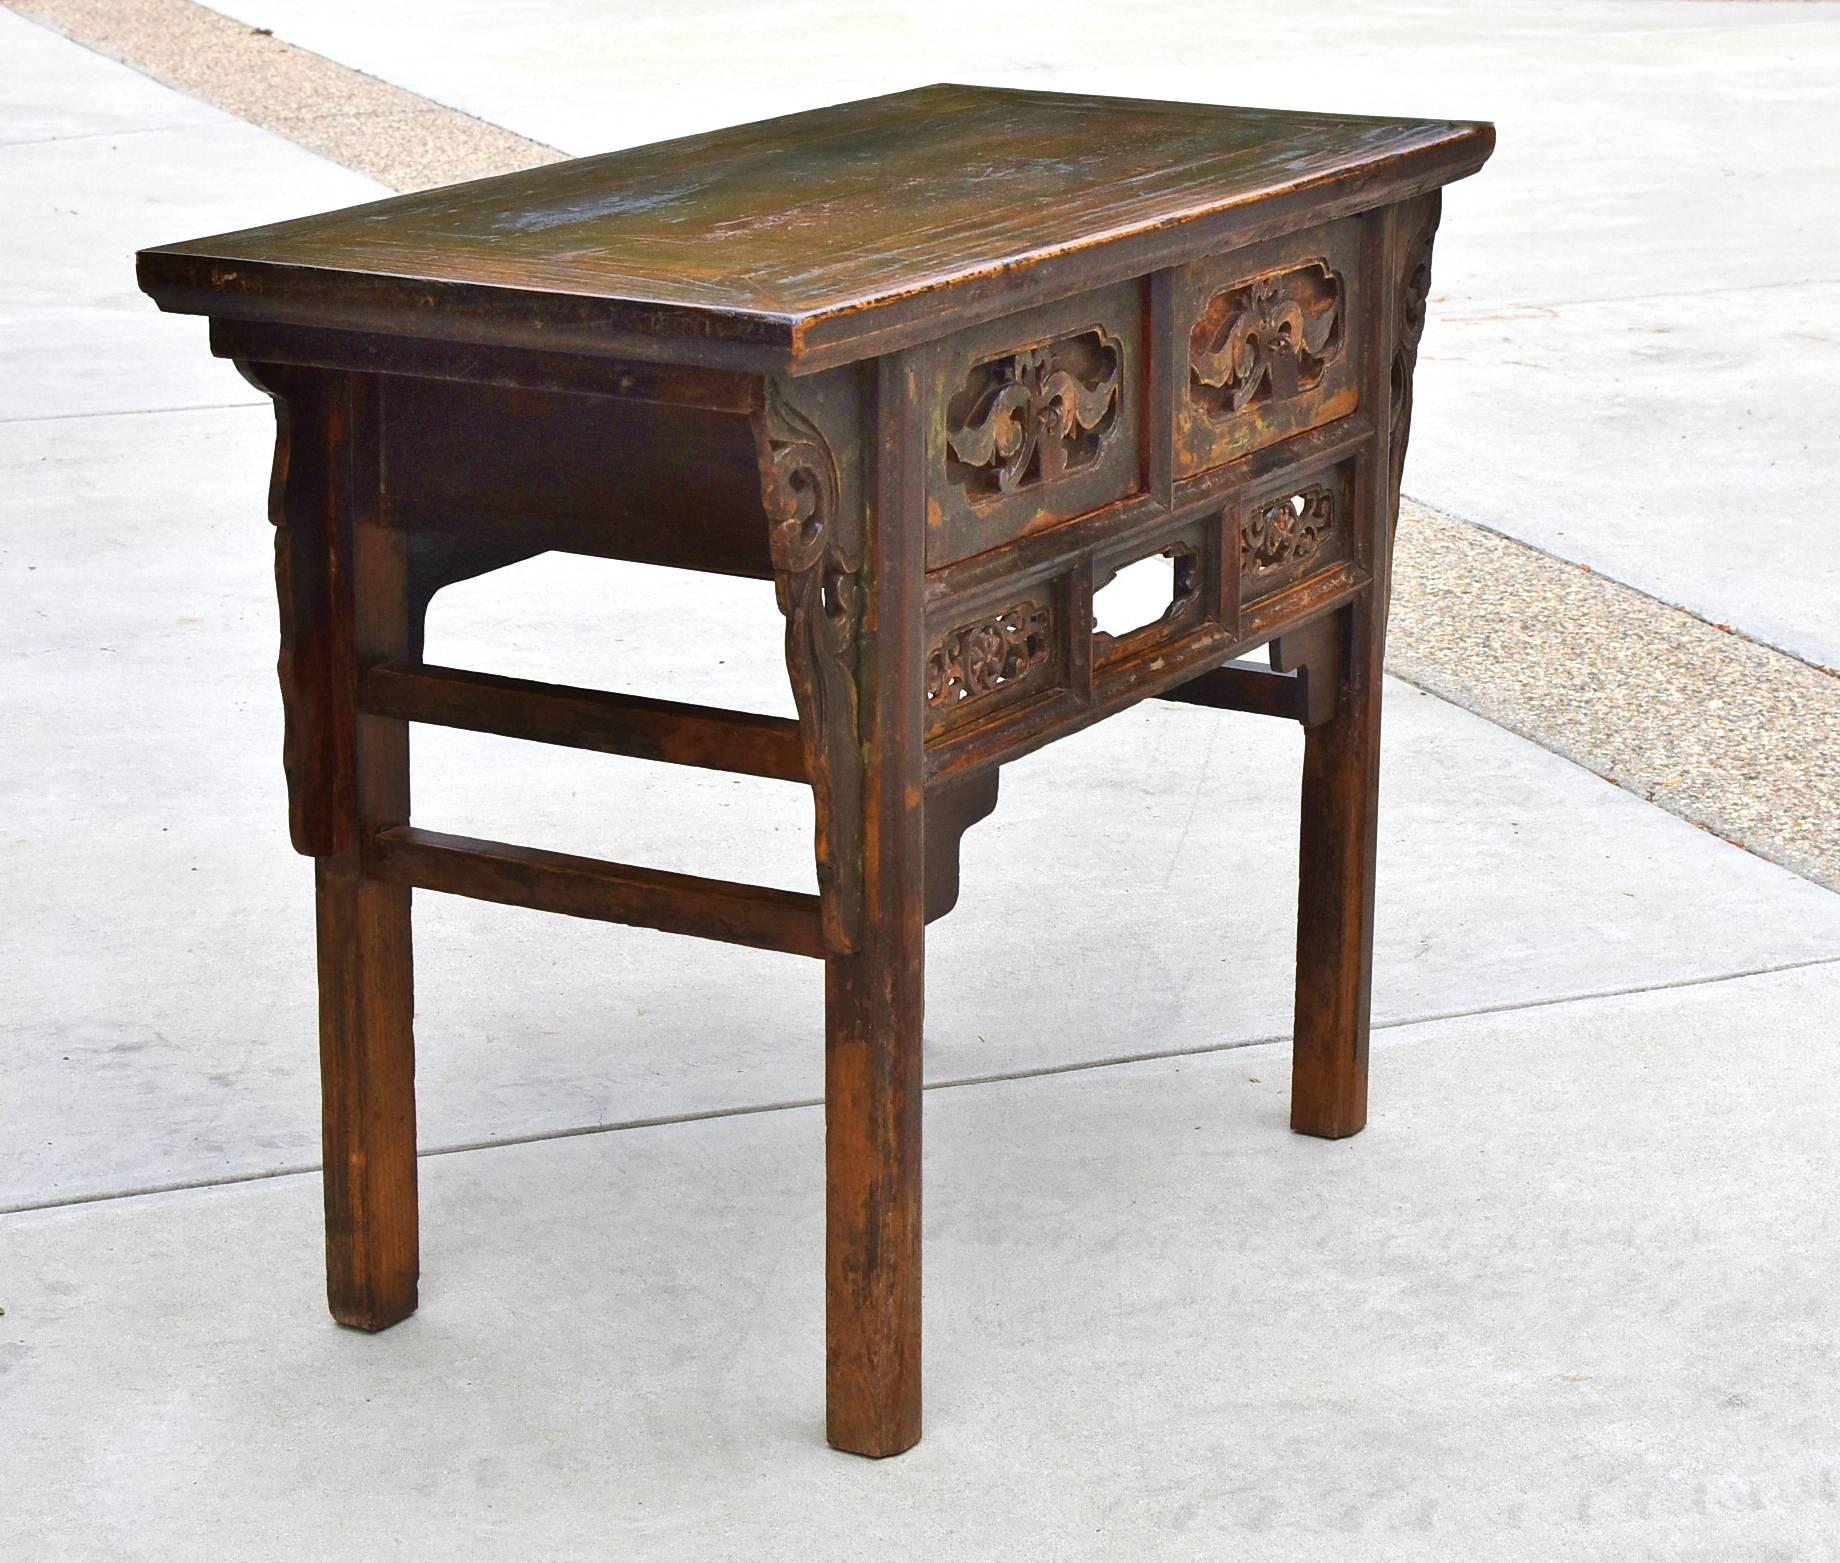 19th Century, Carved Table, Chinese Antique Table with Peony 4